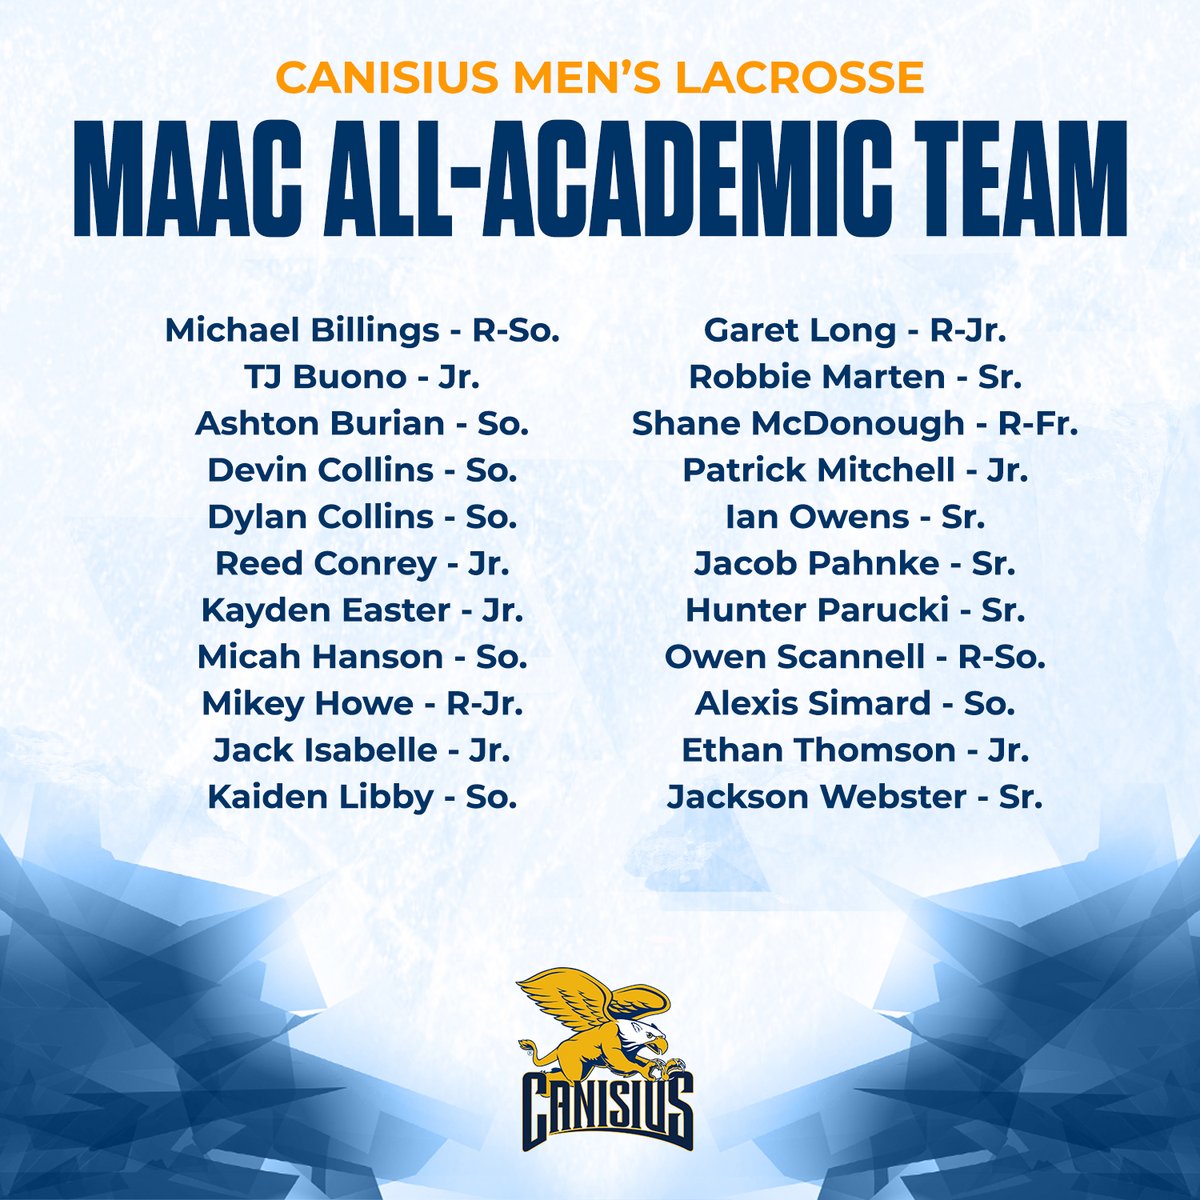 Congratulations to our 2️⃣2️⃣ student-athletes who were named to the @MAACSports All-Academic Team! #Griffs